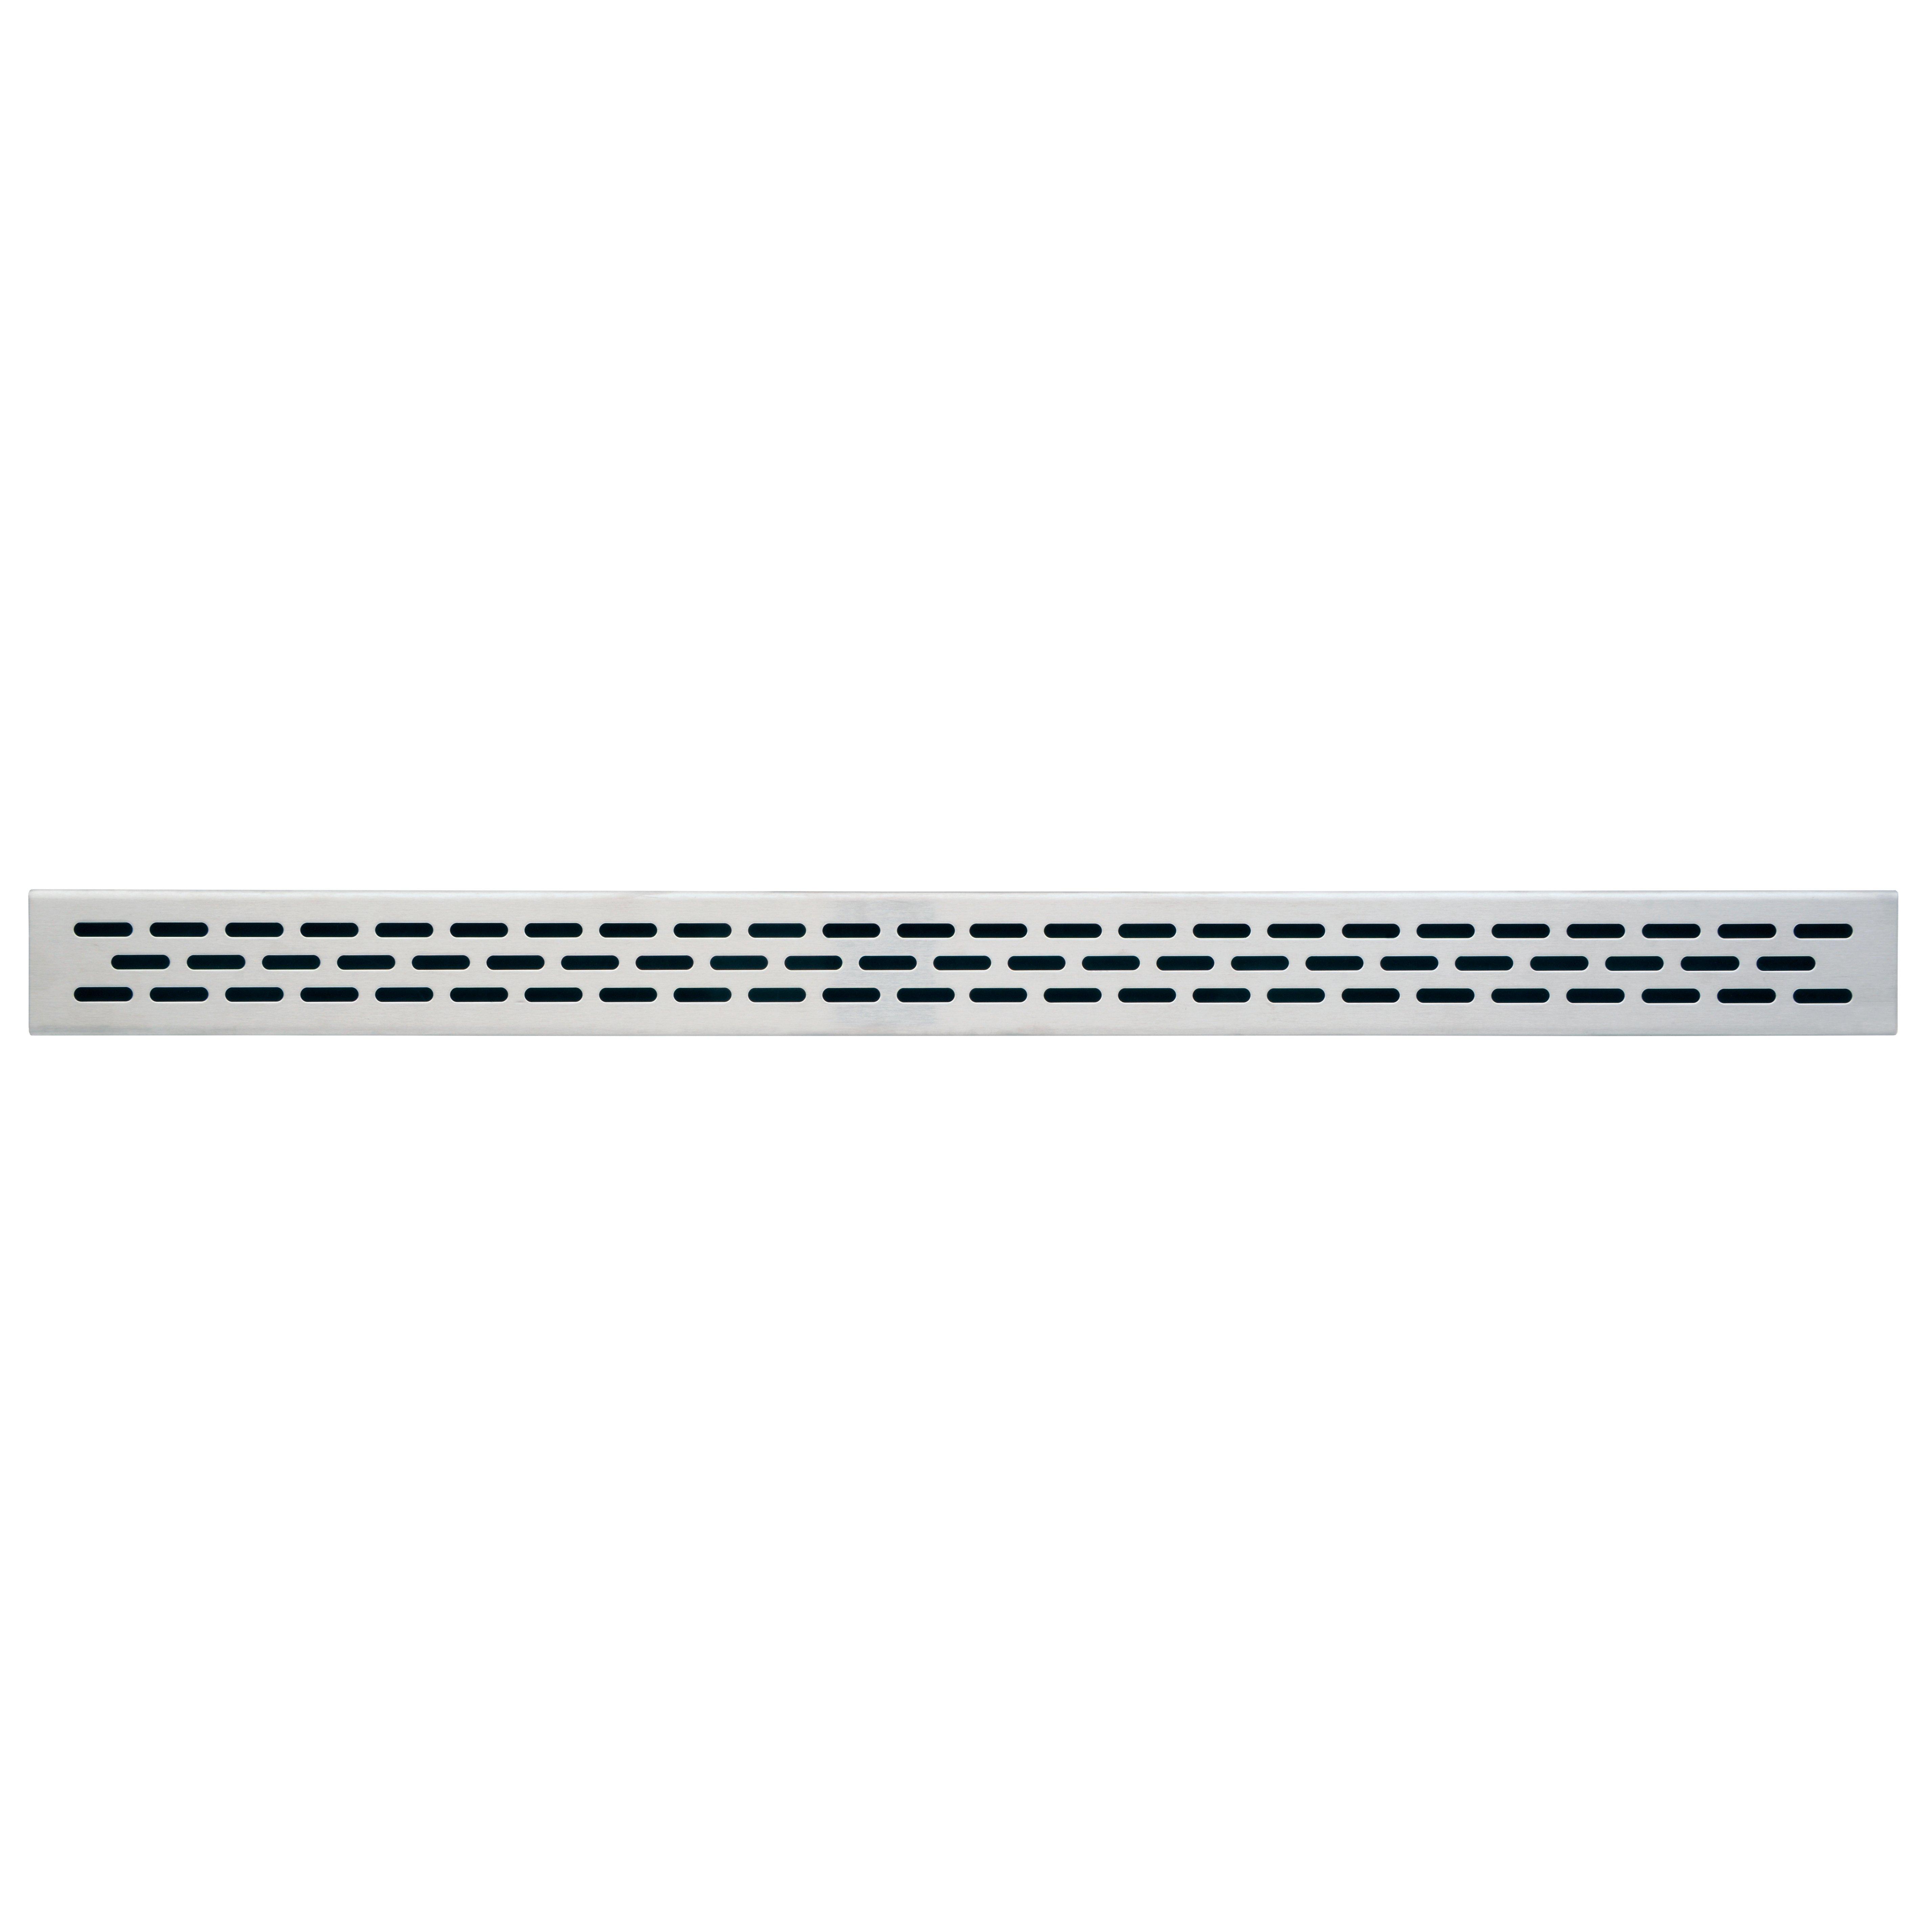 Compotite 36in. Oval Design Stainless Steel Linear Drain Grate